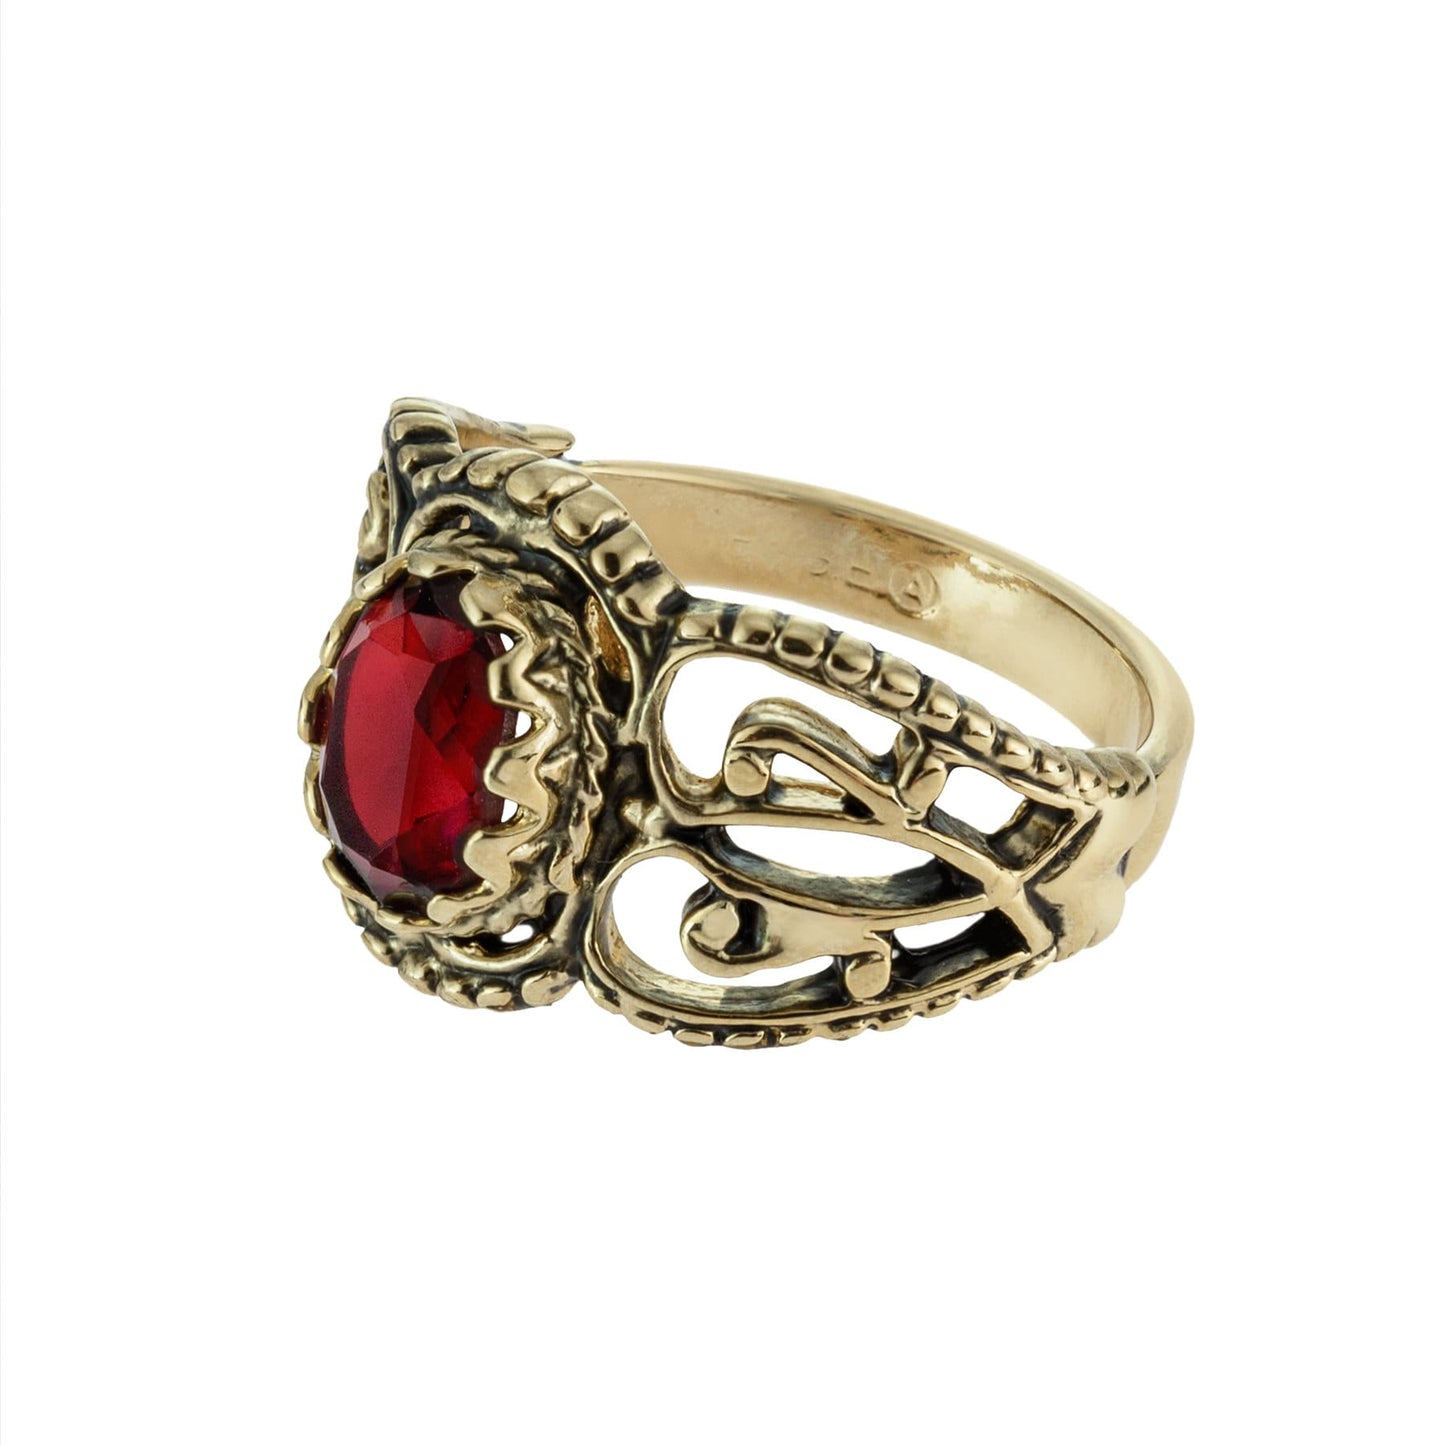 Vintage Ring Ruby Crystal Filigree Ring Antique 18k Gold  R142 - Limited Stock - Never Worn